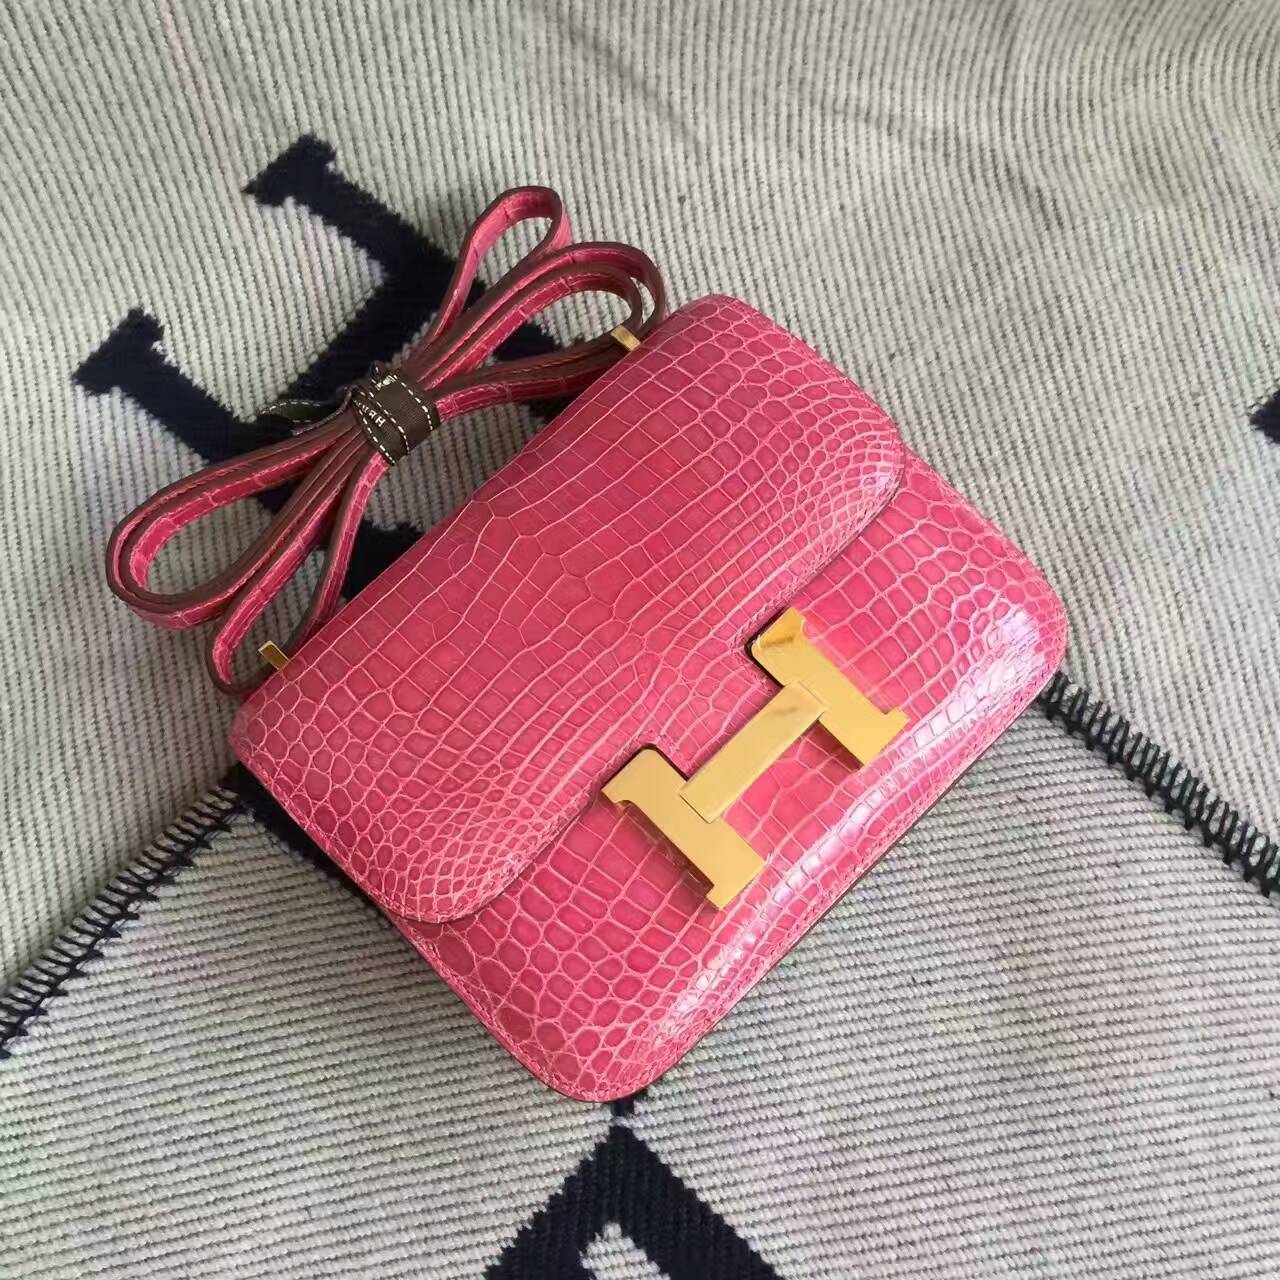 Discount Hermes Crocodile Shiny Leather Constance Bag19cm in Peach Pink